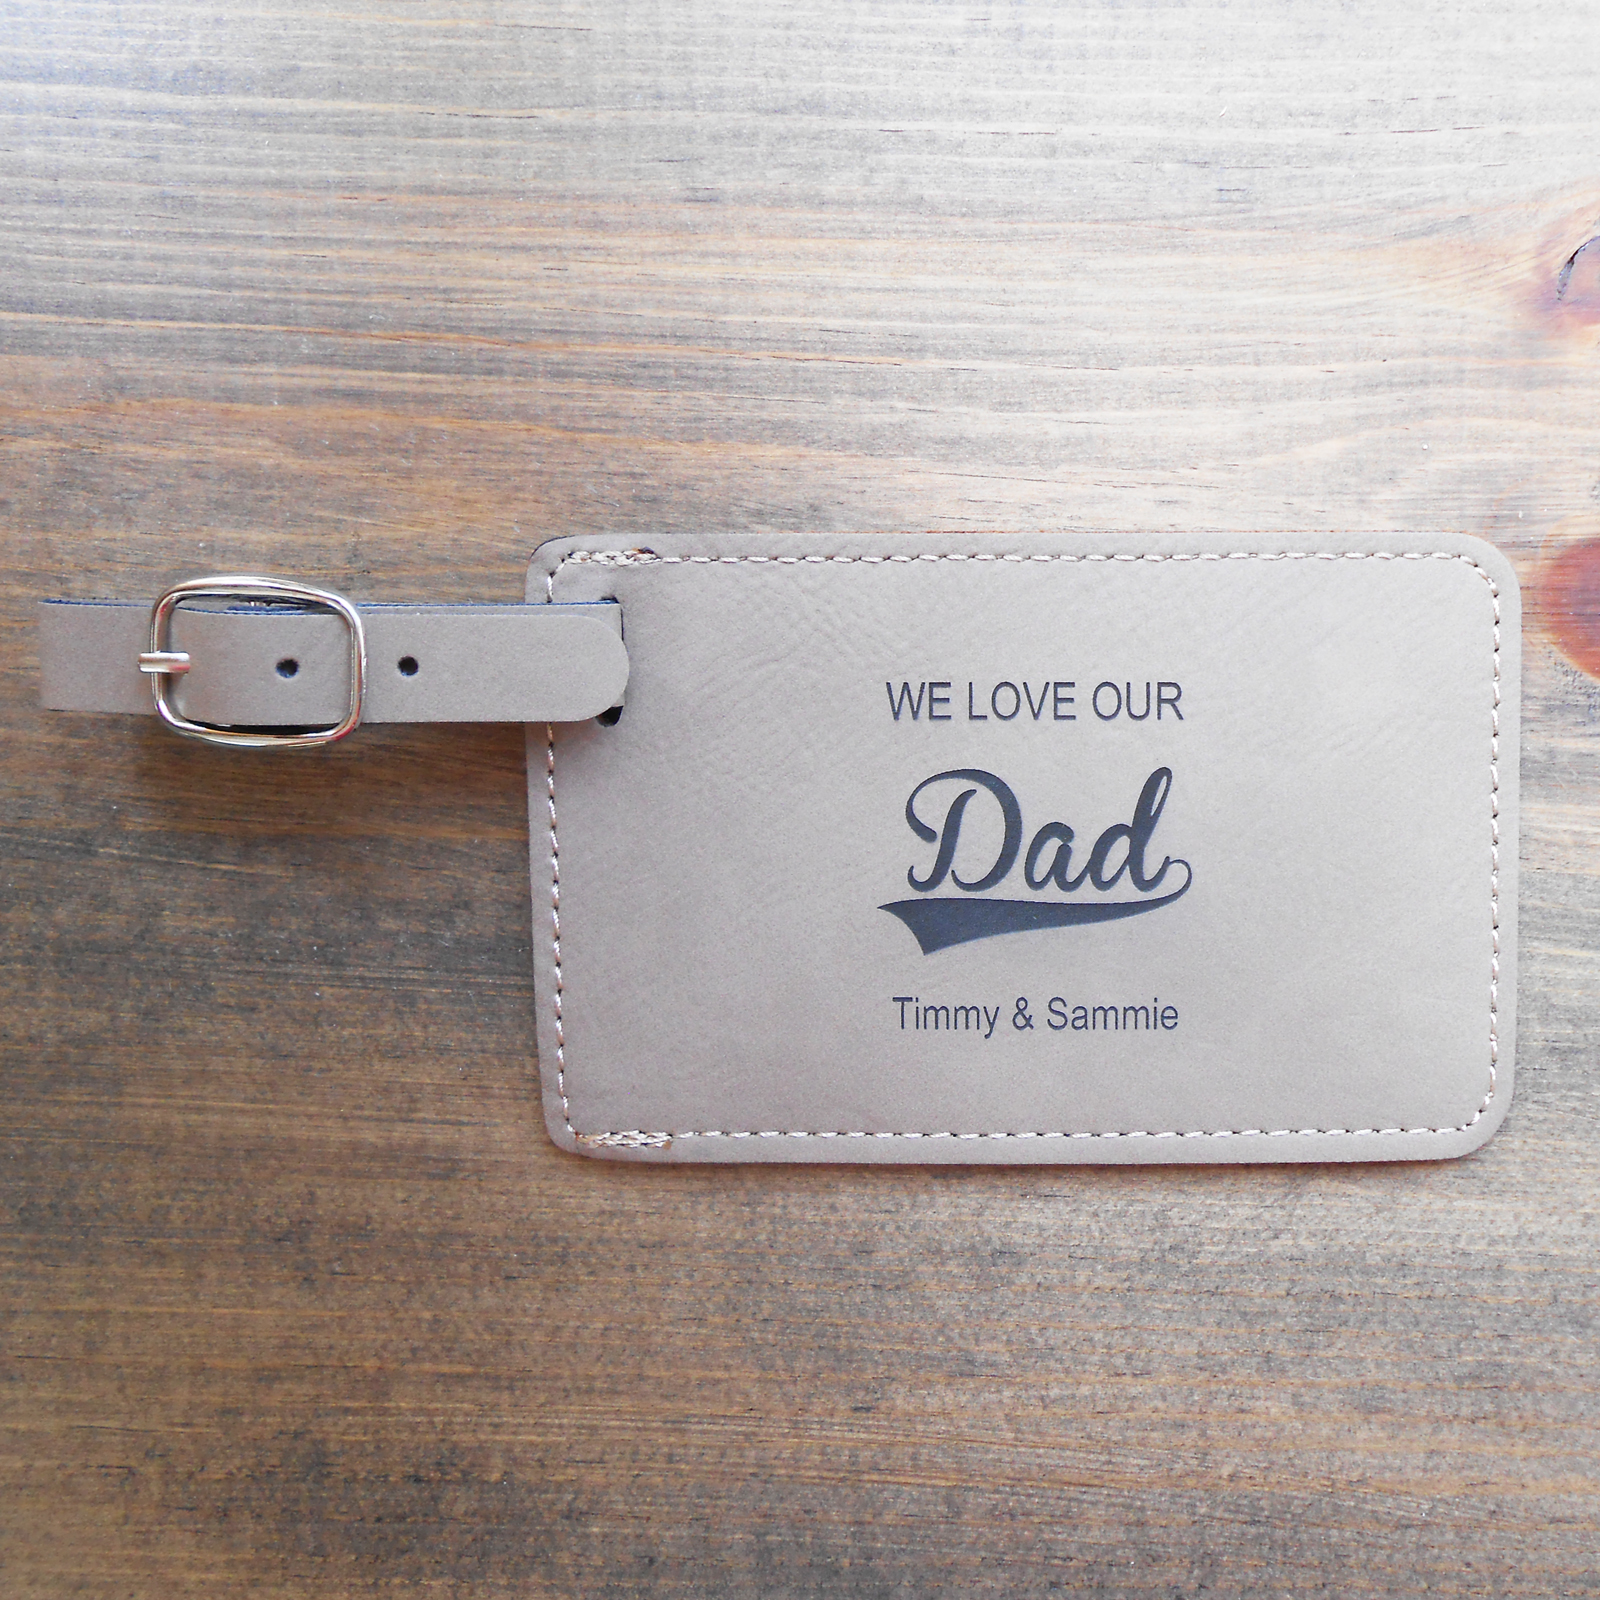 Personalized Father's Day gifts he'll love - Reviewed